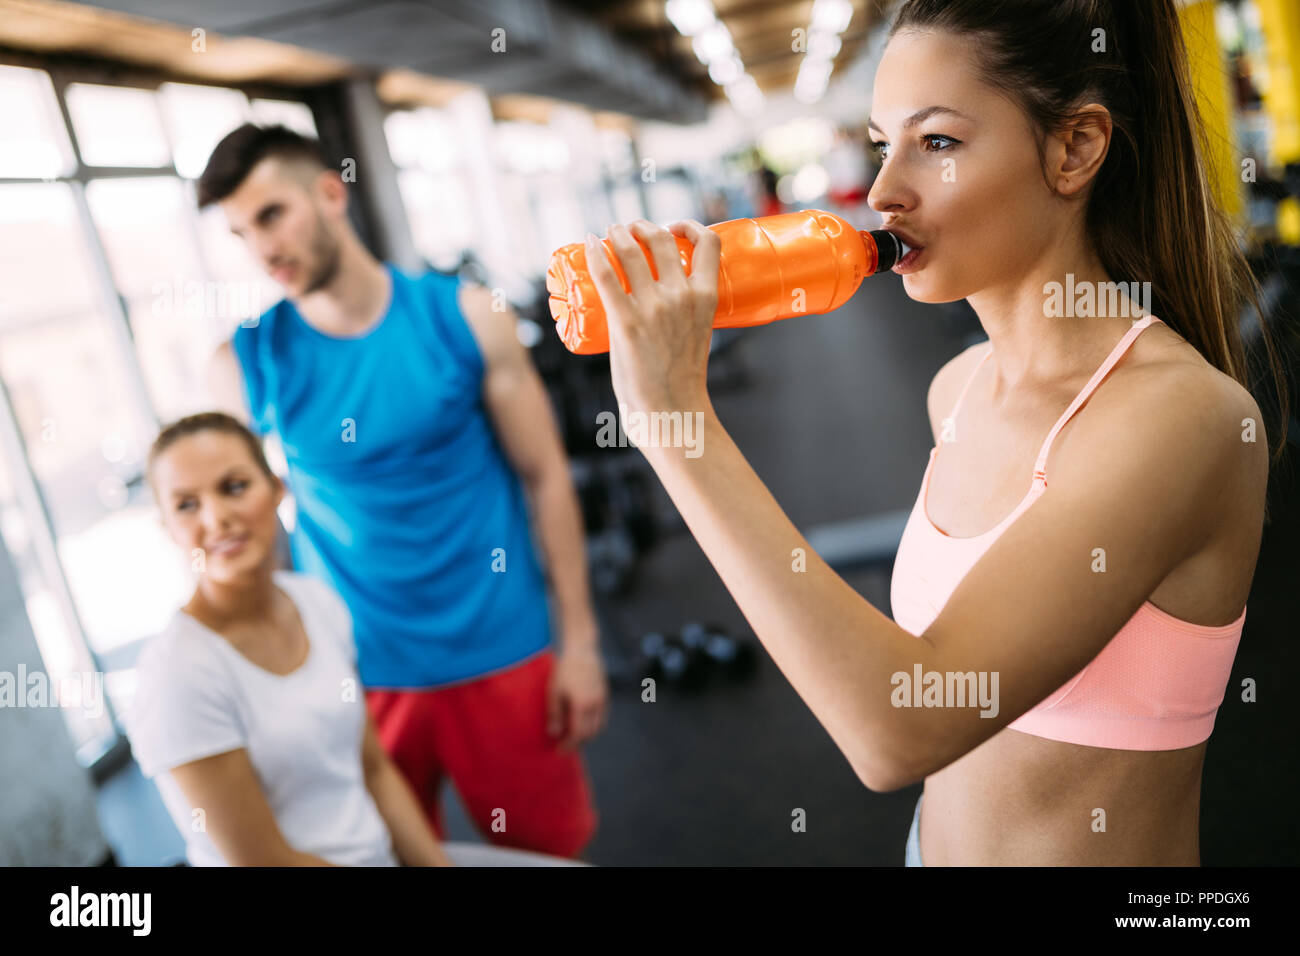 Sporty woman hydrating during workout Stock Photo